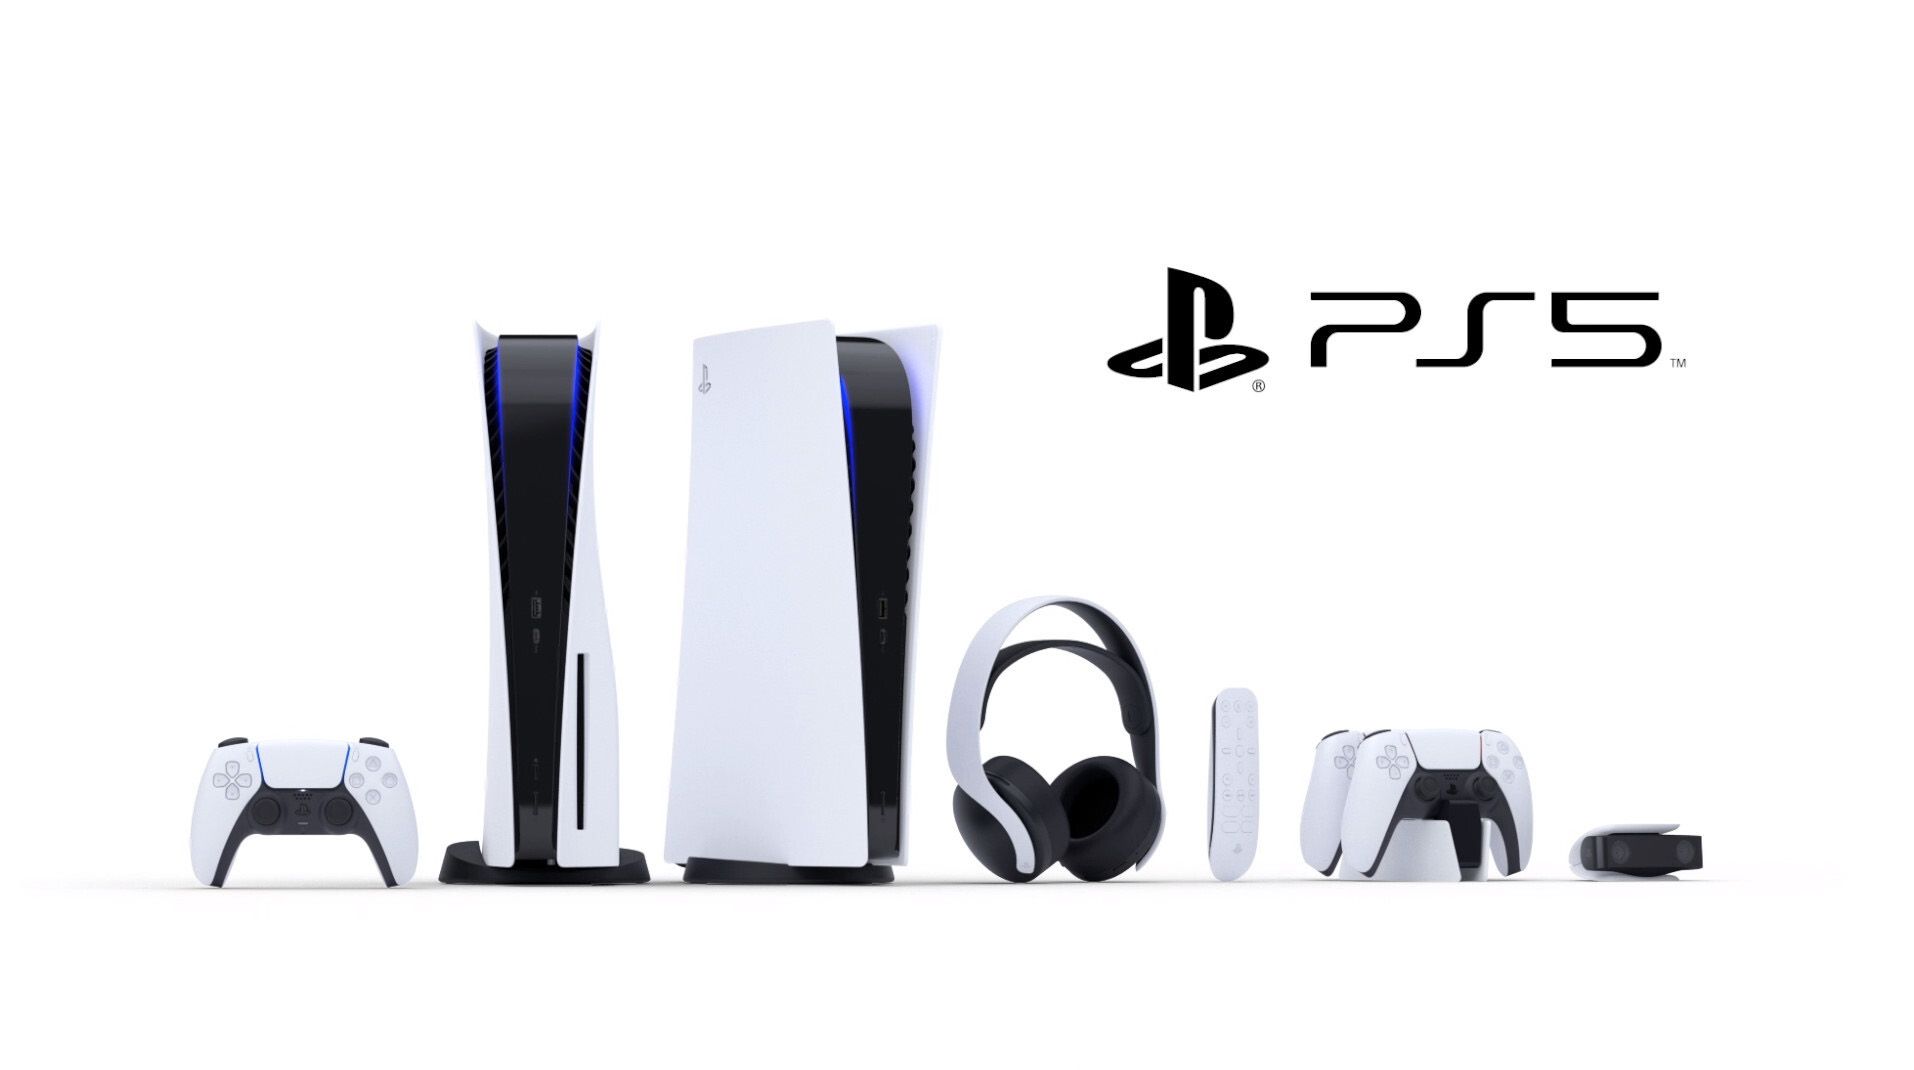 PS5 Family of Devices